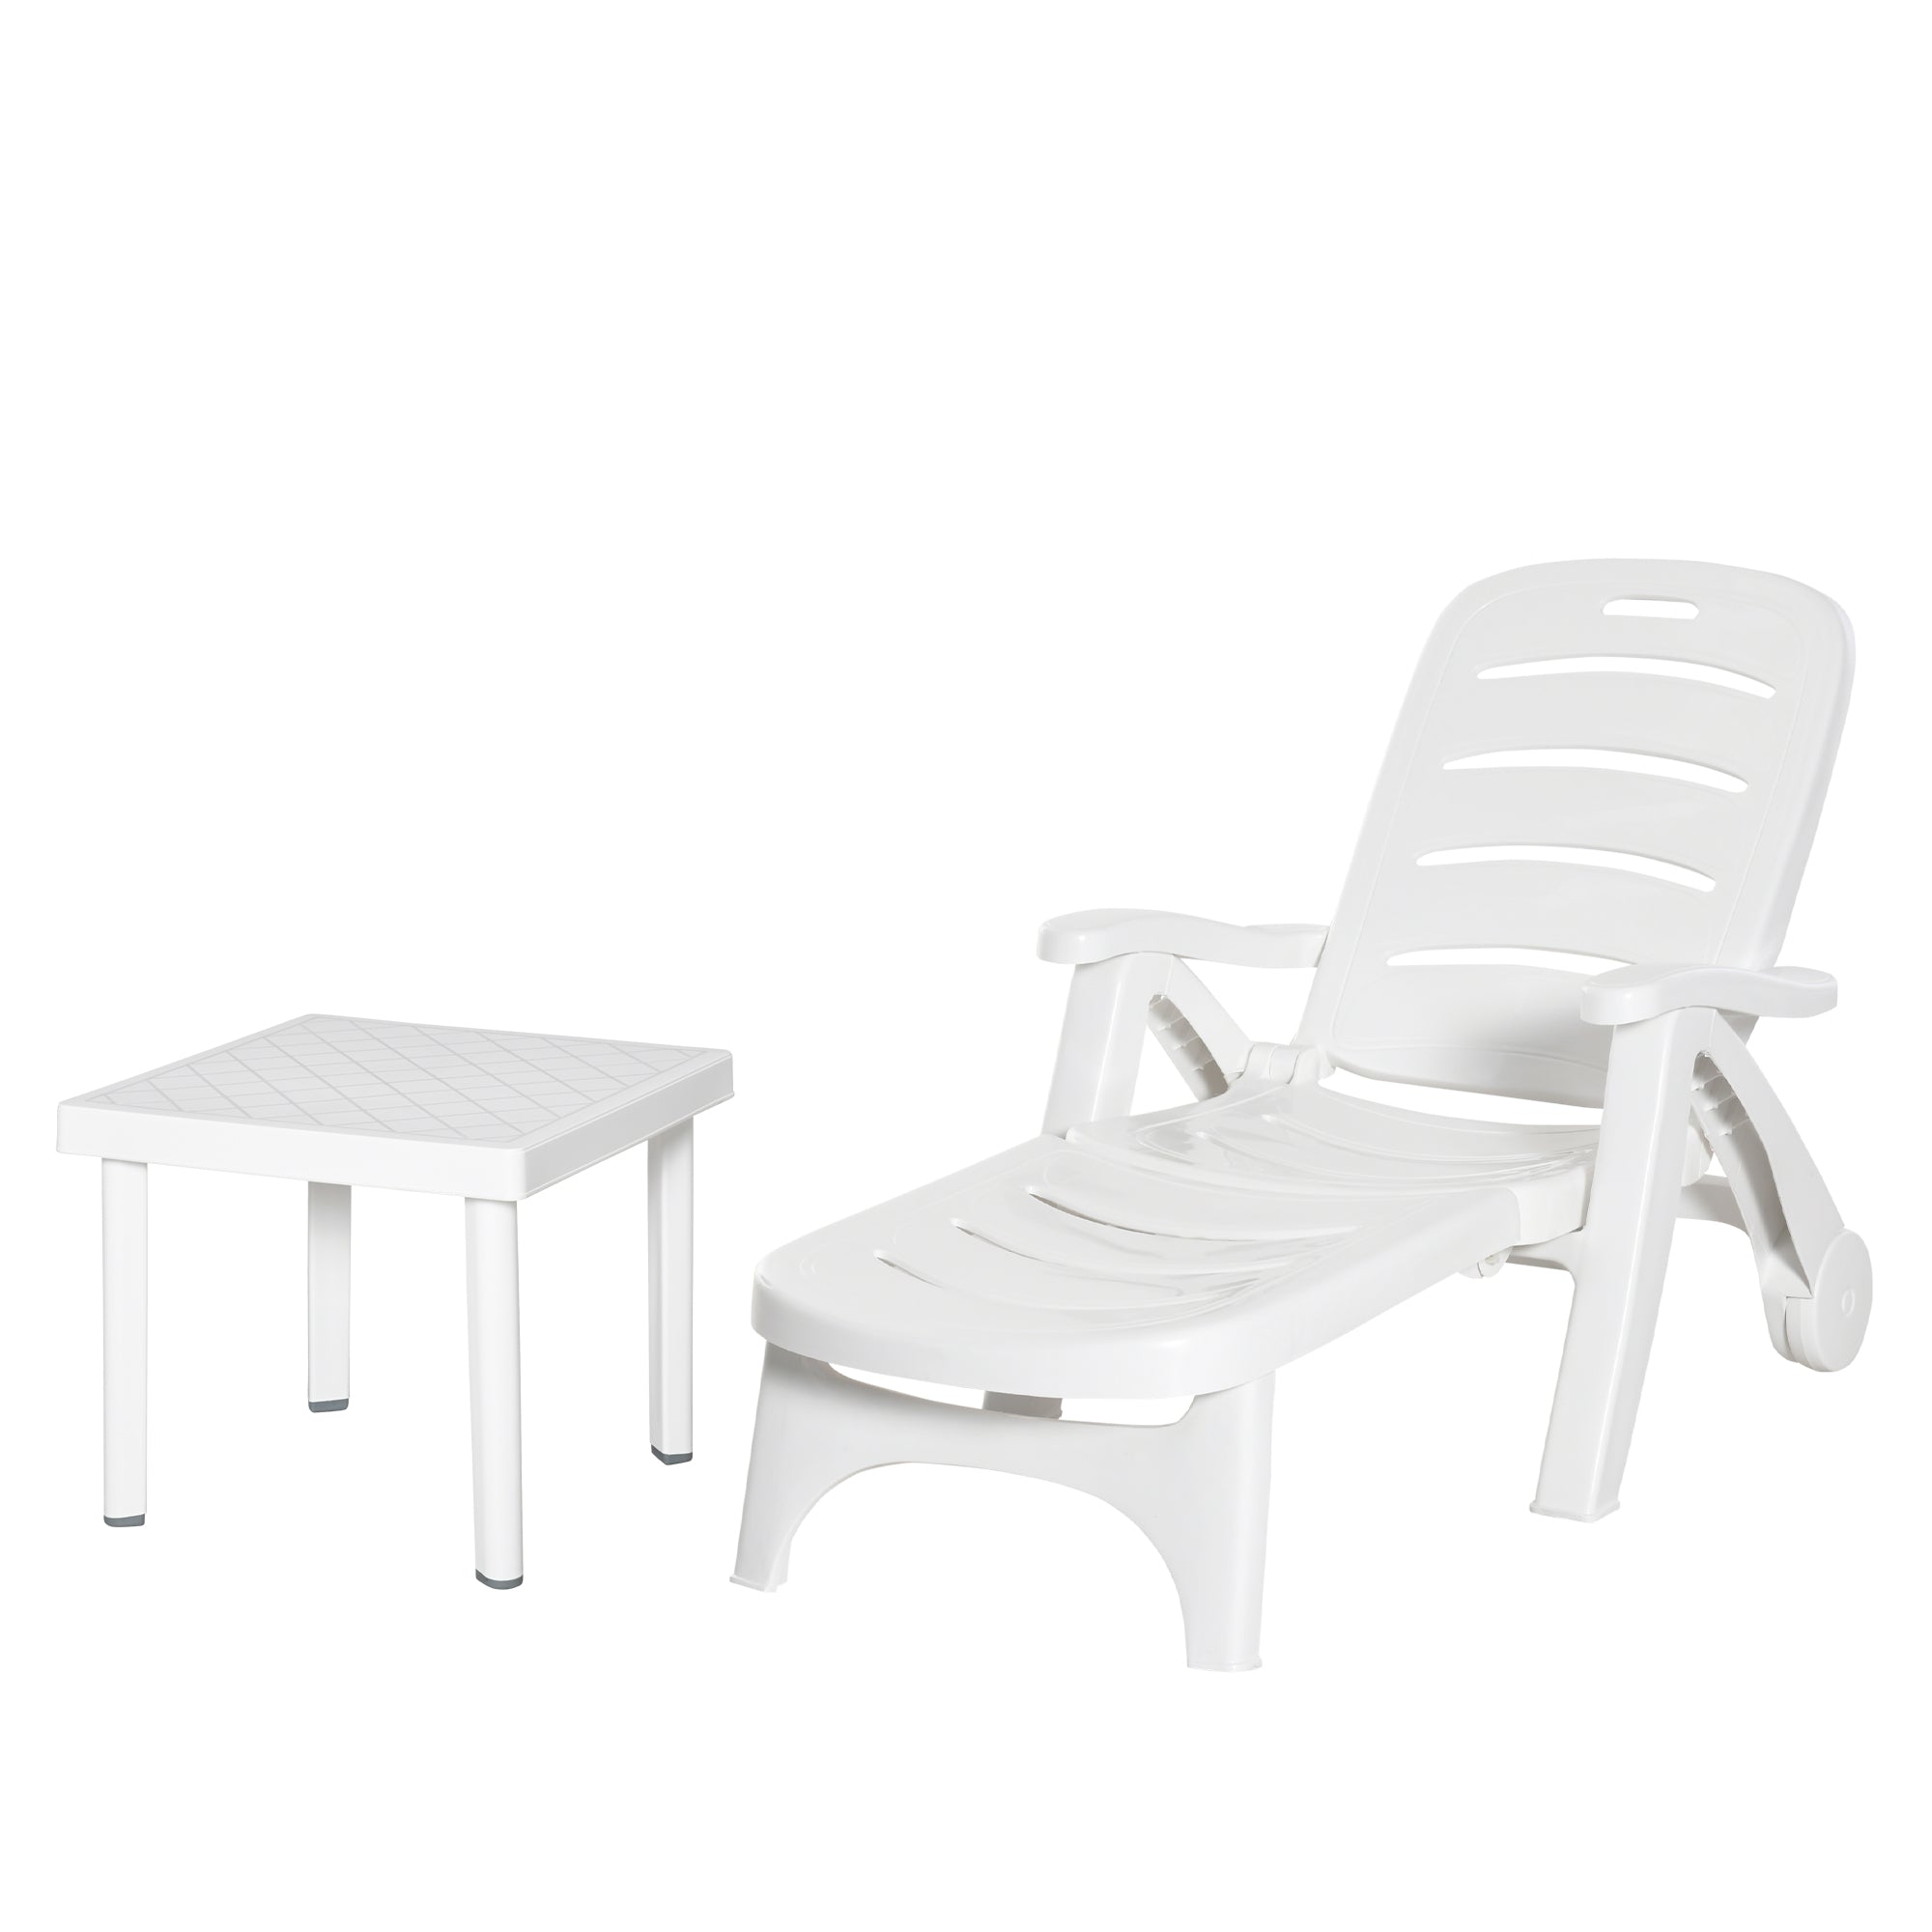 2pcs Garden Furniture Set Outdoor Furniture Set Dining Table, 1 Lounge Chair and 1 Garden Side Table White-0